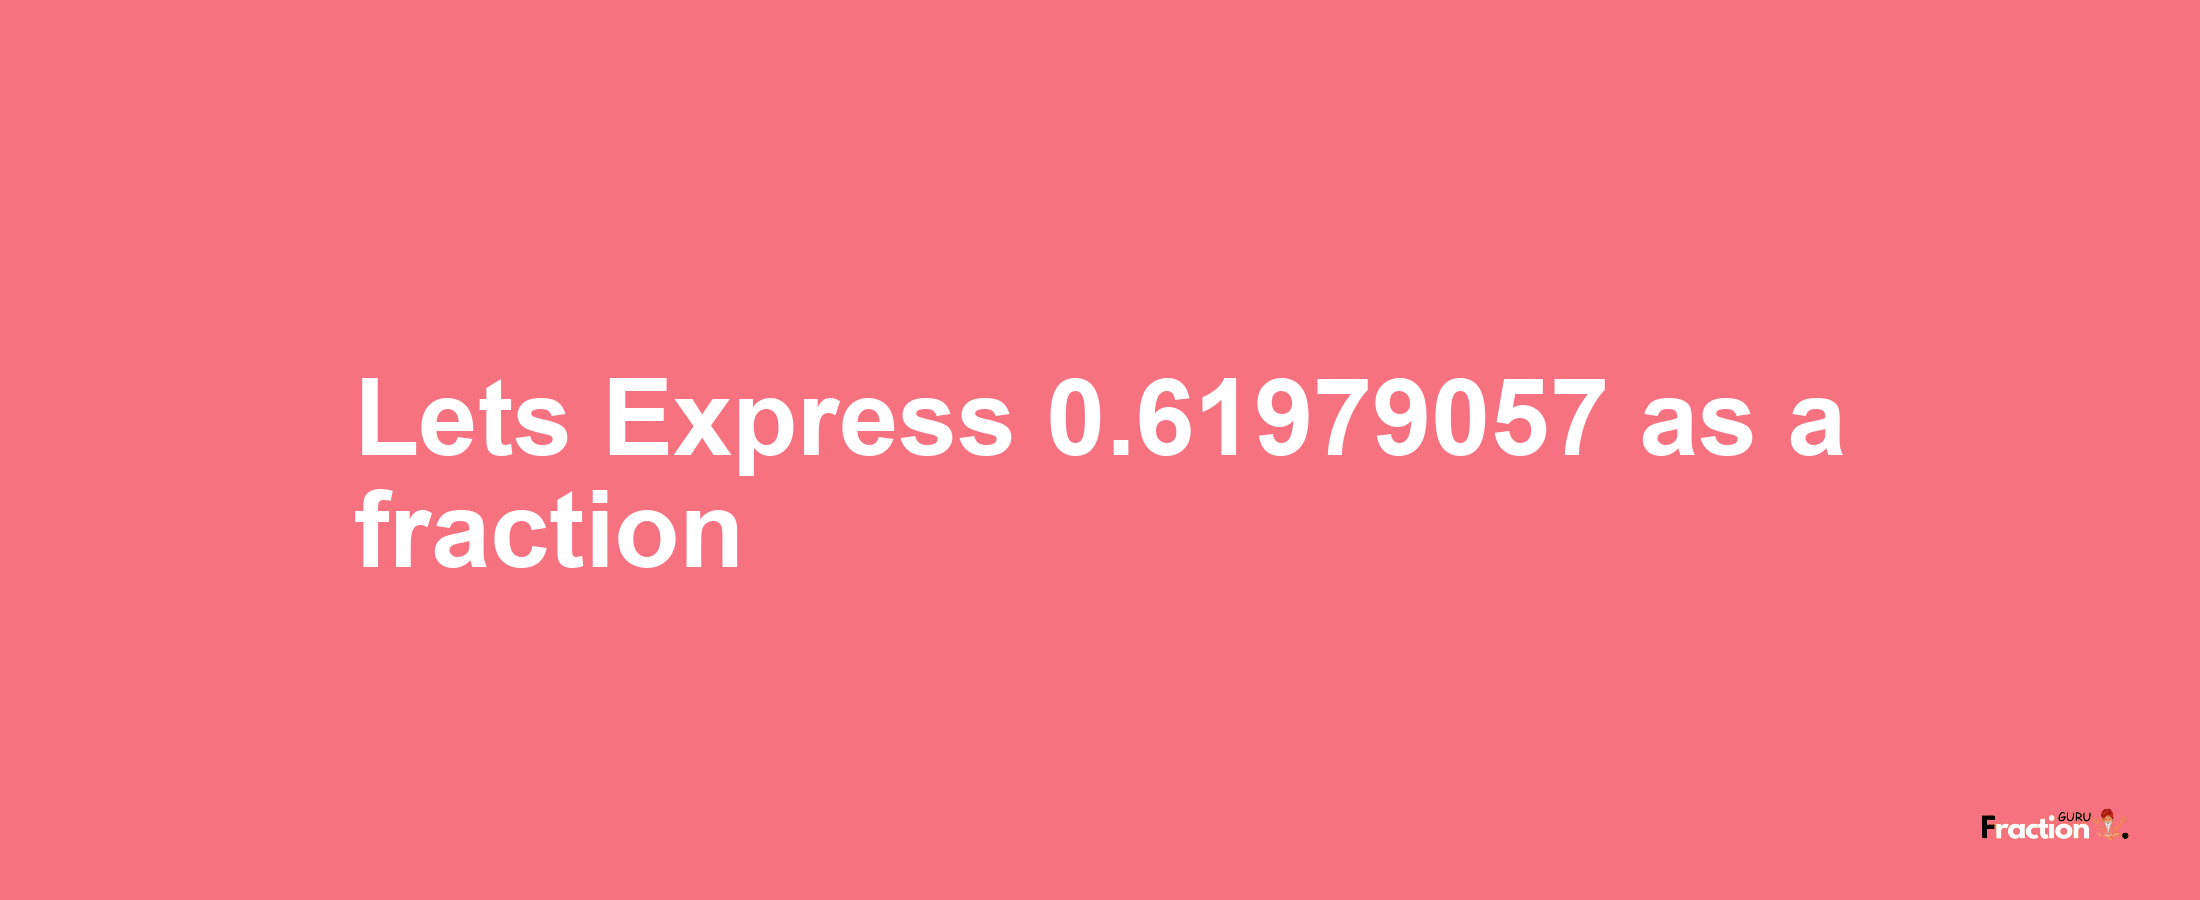 Lets Express 0.61979057 as afraction